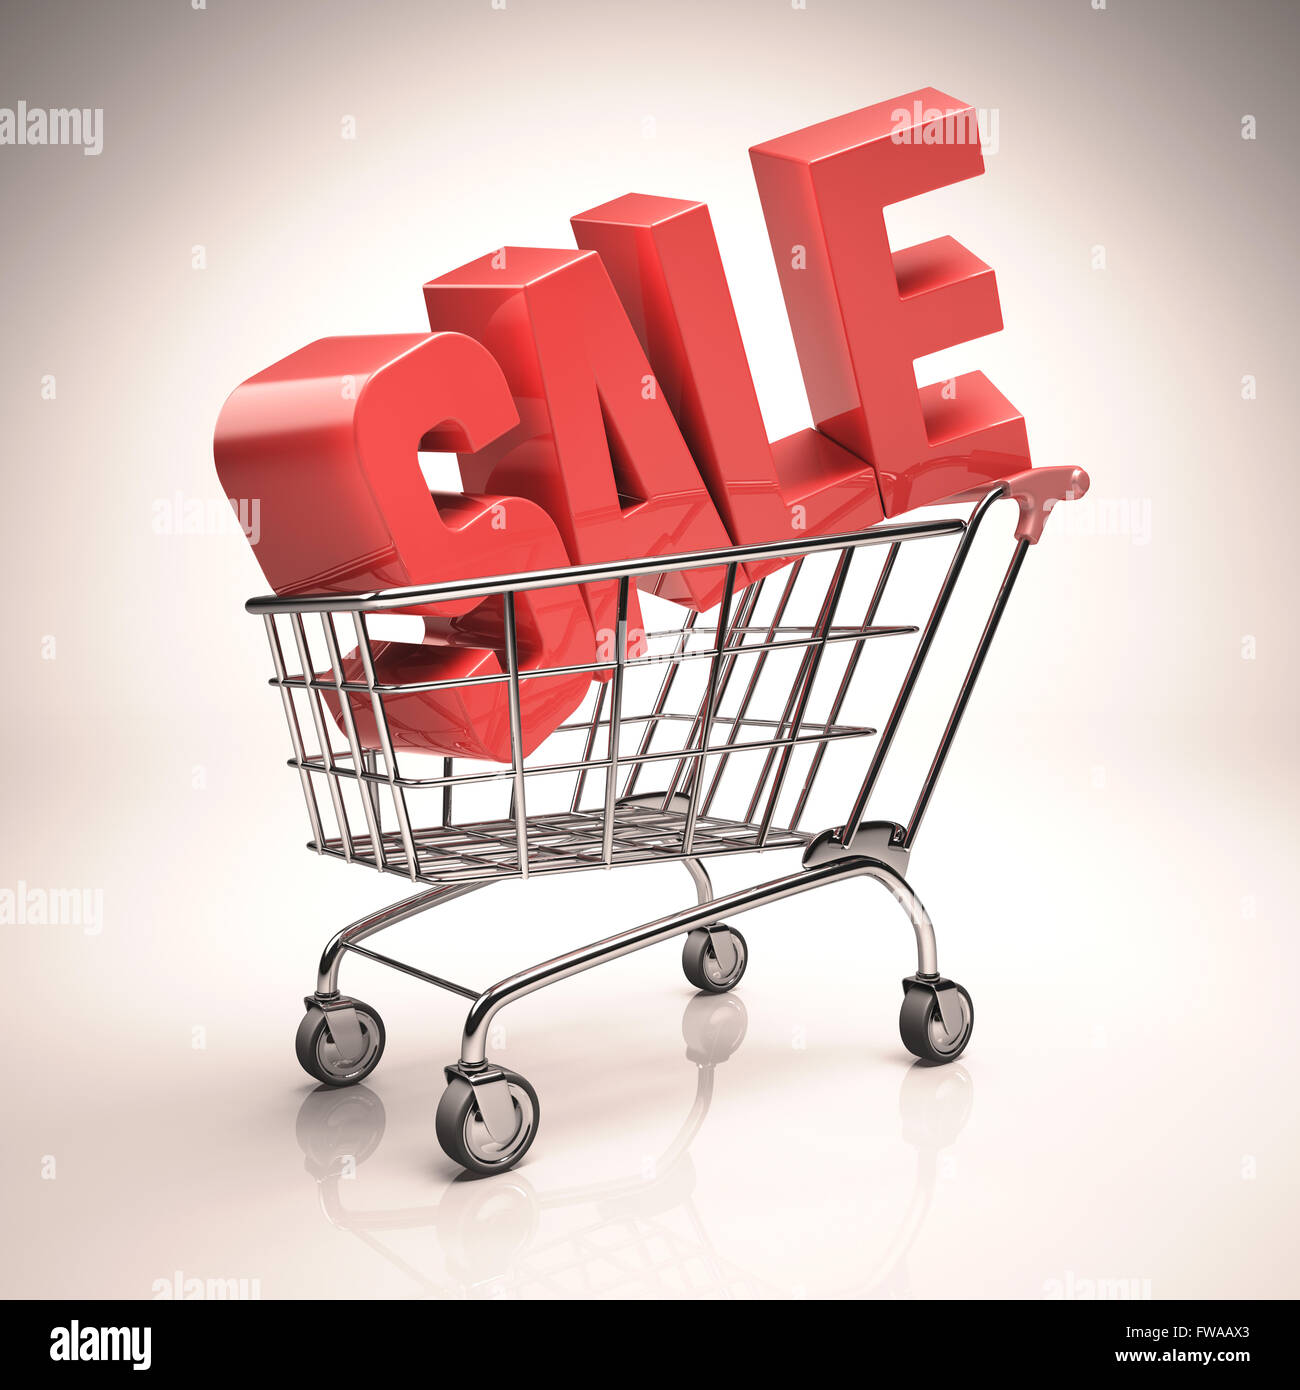 3D image concept. 'Sale' word in red inside a shopping cart. Clipping path included. Stock Photo